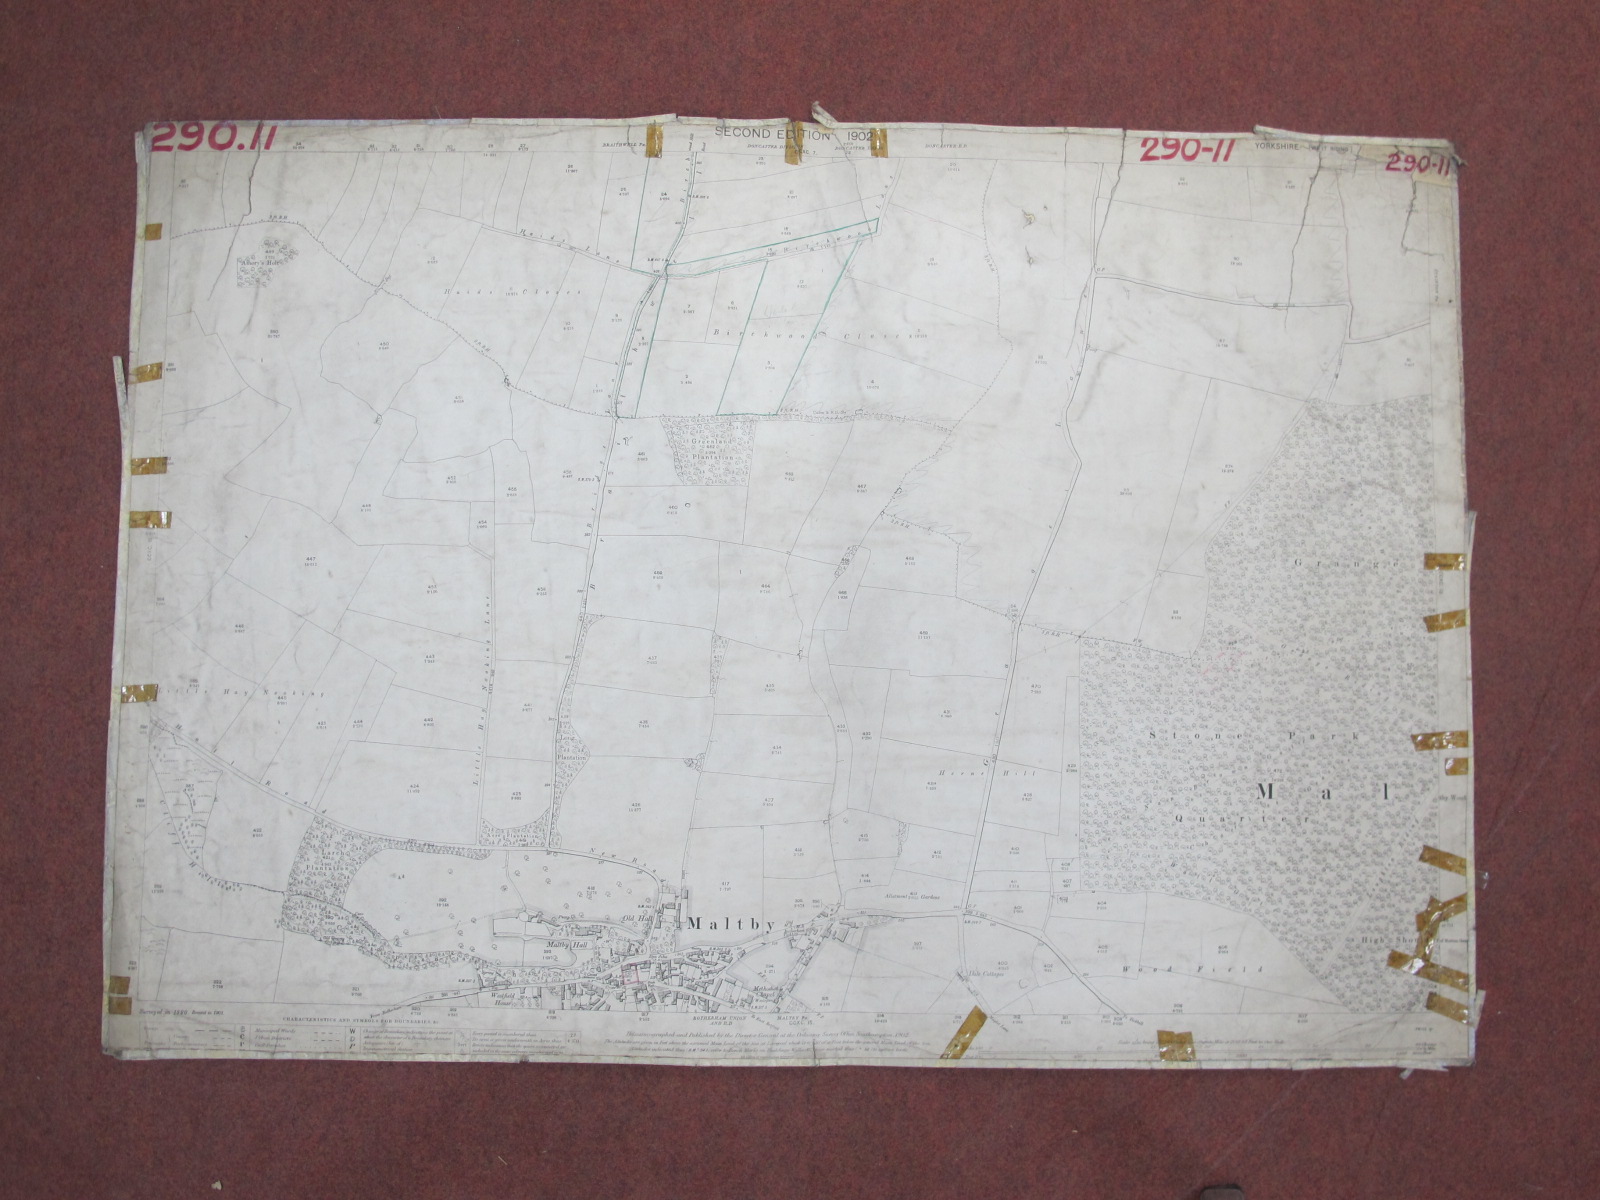 West Riding Yorkshire, Rotherham and area - some dates noted, 1902, 1956, various scales, dirty - Image 2 of 11